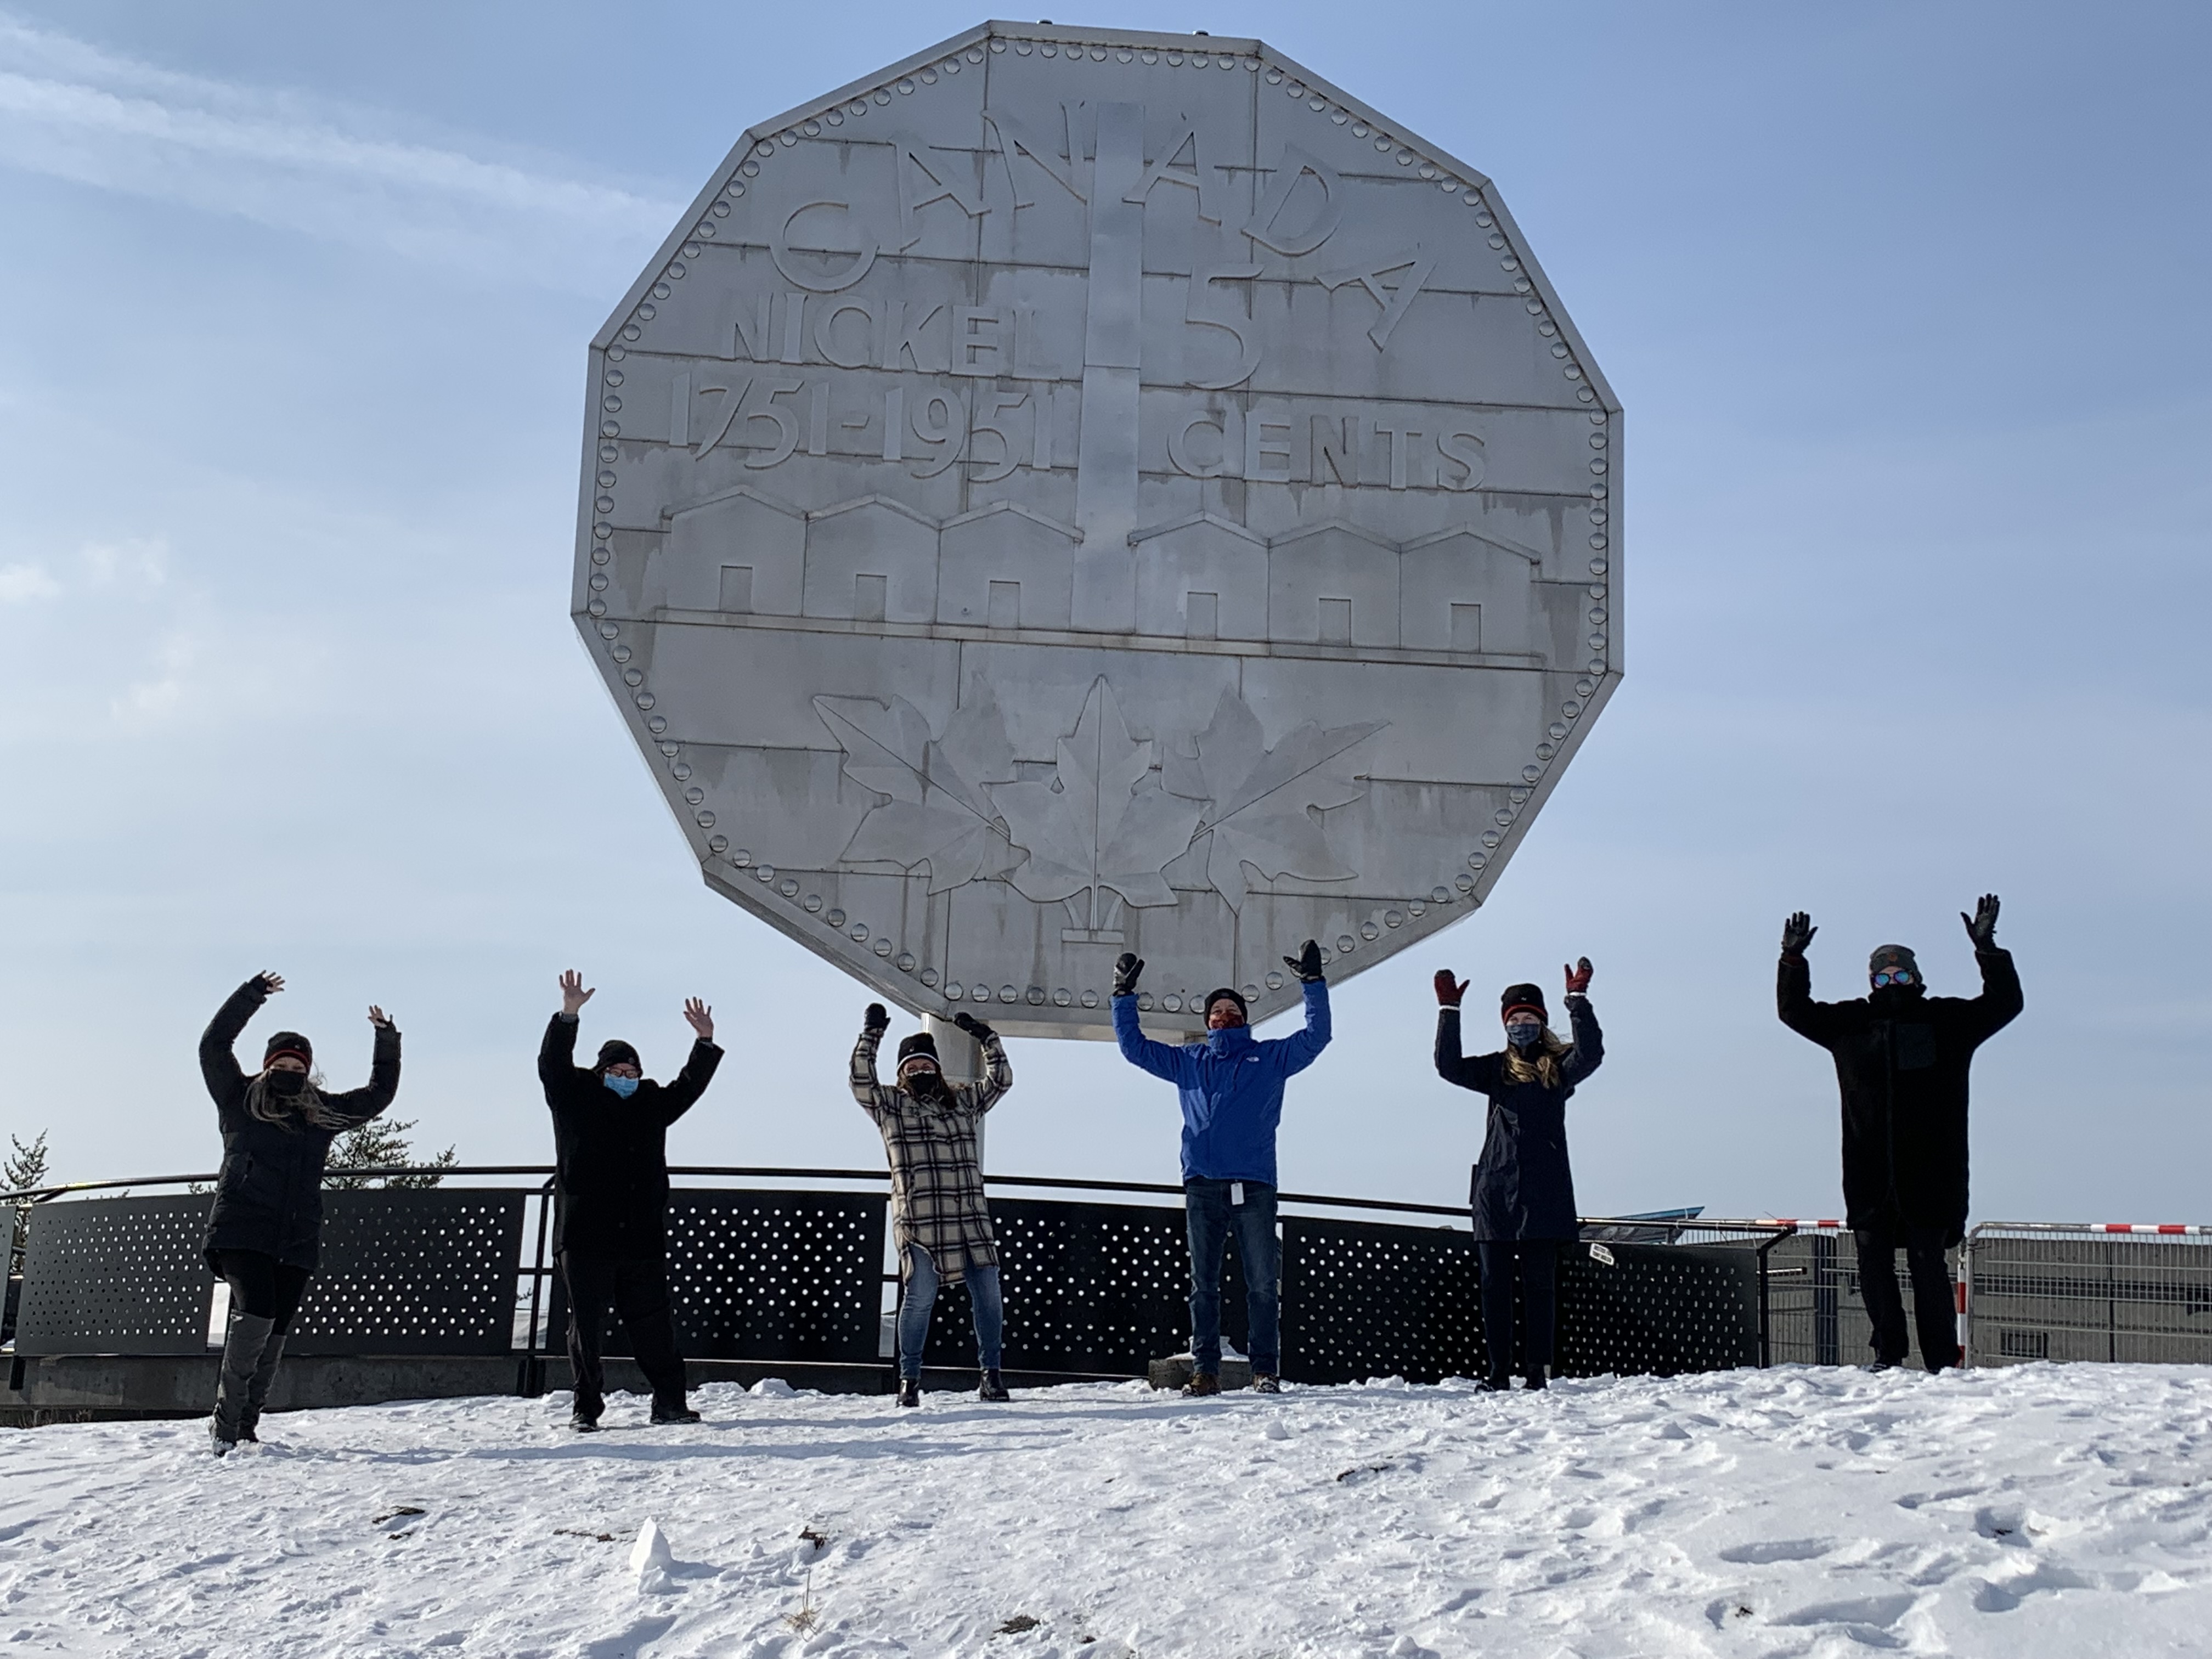 staff standing in front of big nickel with hands in the air